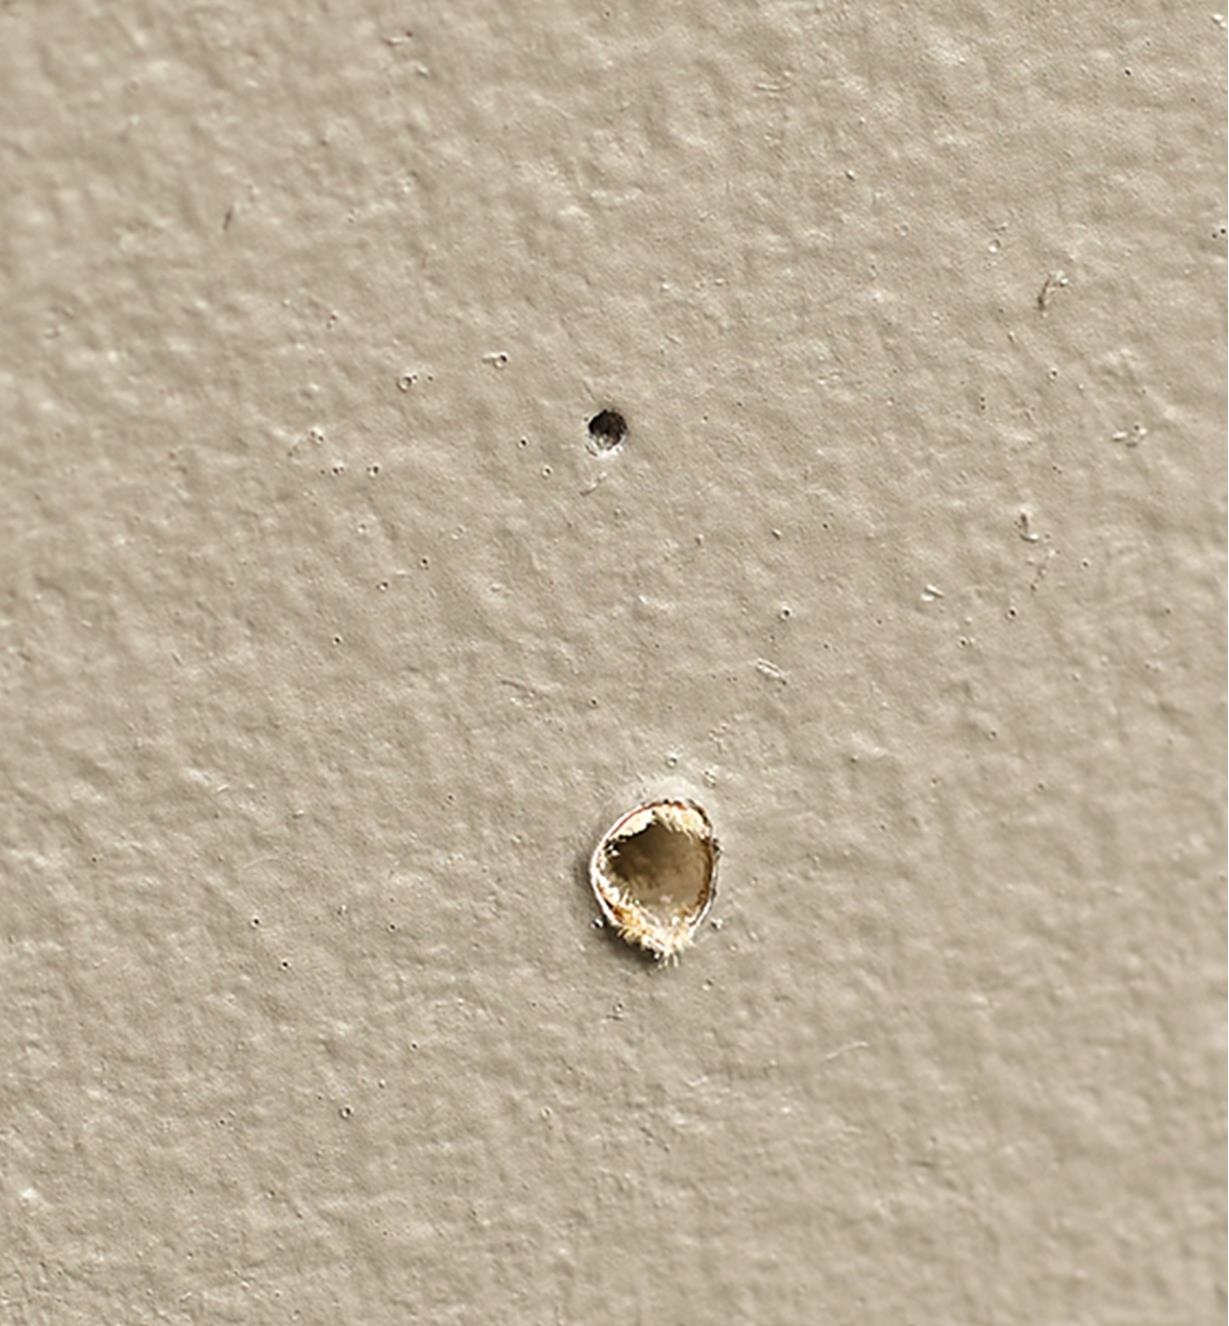 One small hole and one larger hole on a piece of drywall